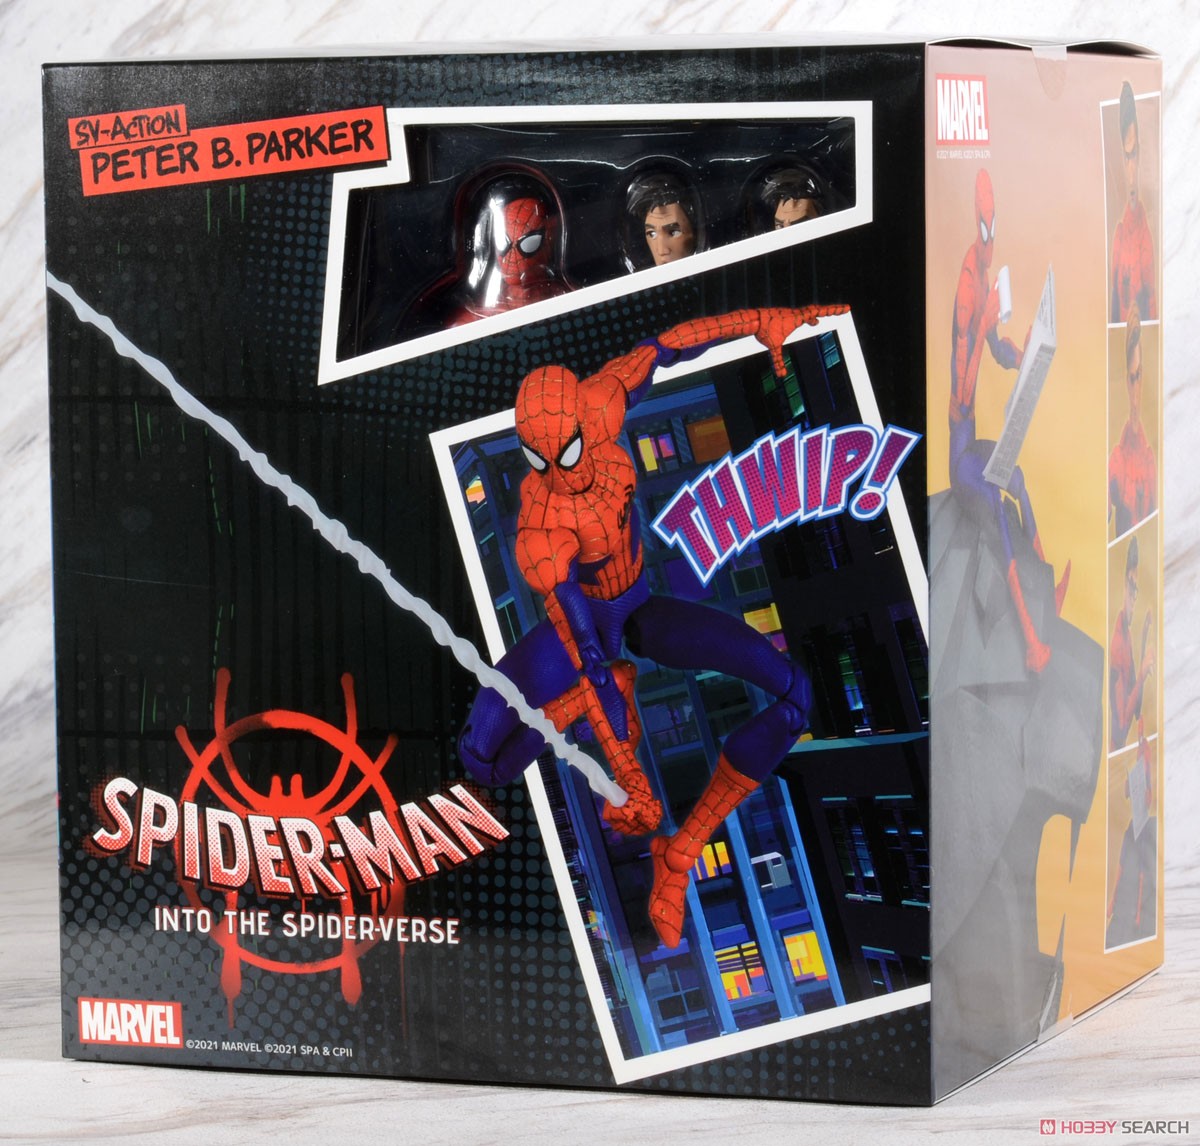 Spider-Man: Into the Spider-Verse SV Action Peter B. Parker/Spider-Man (Completed) Package1